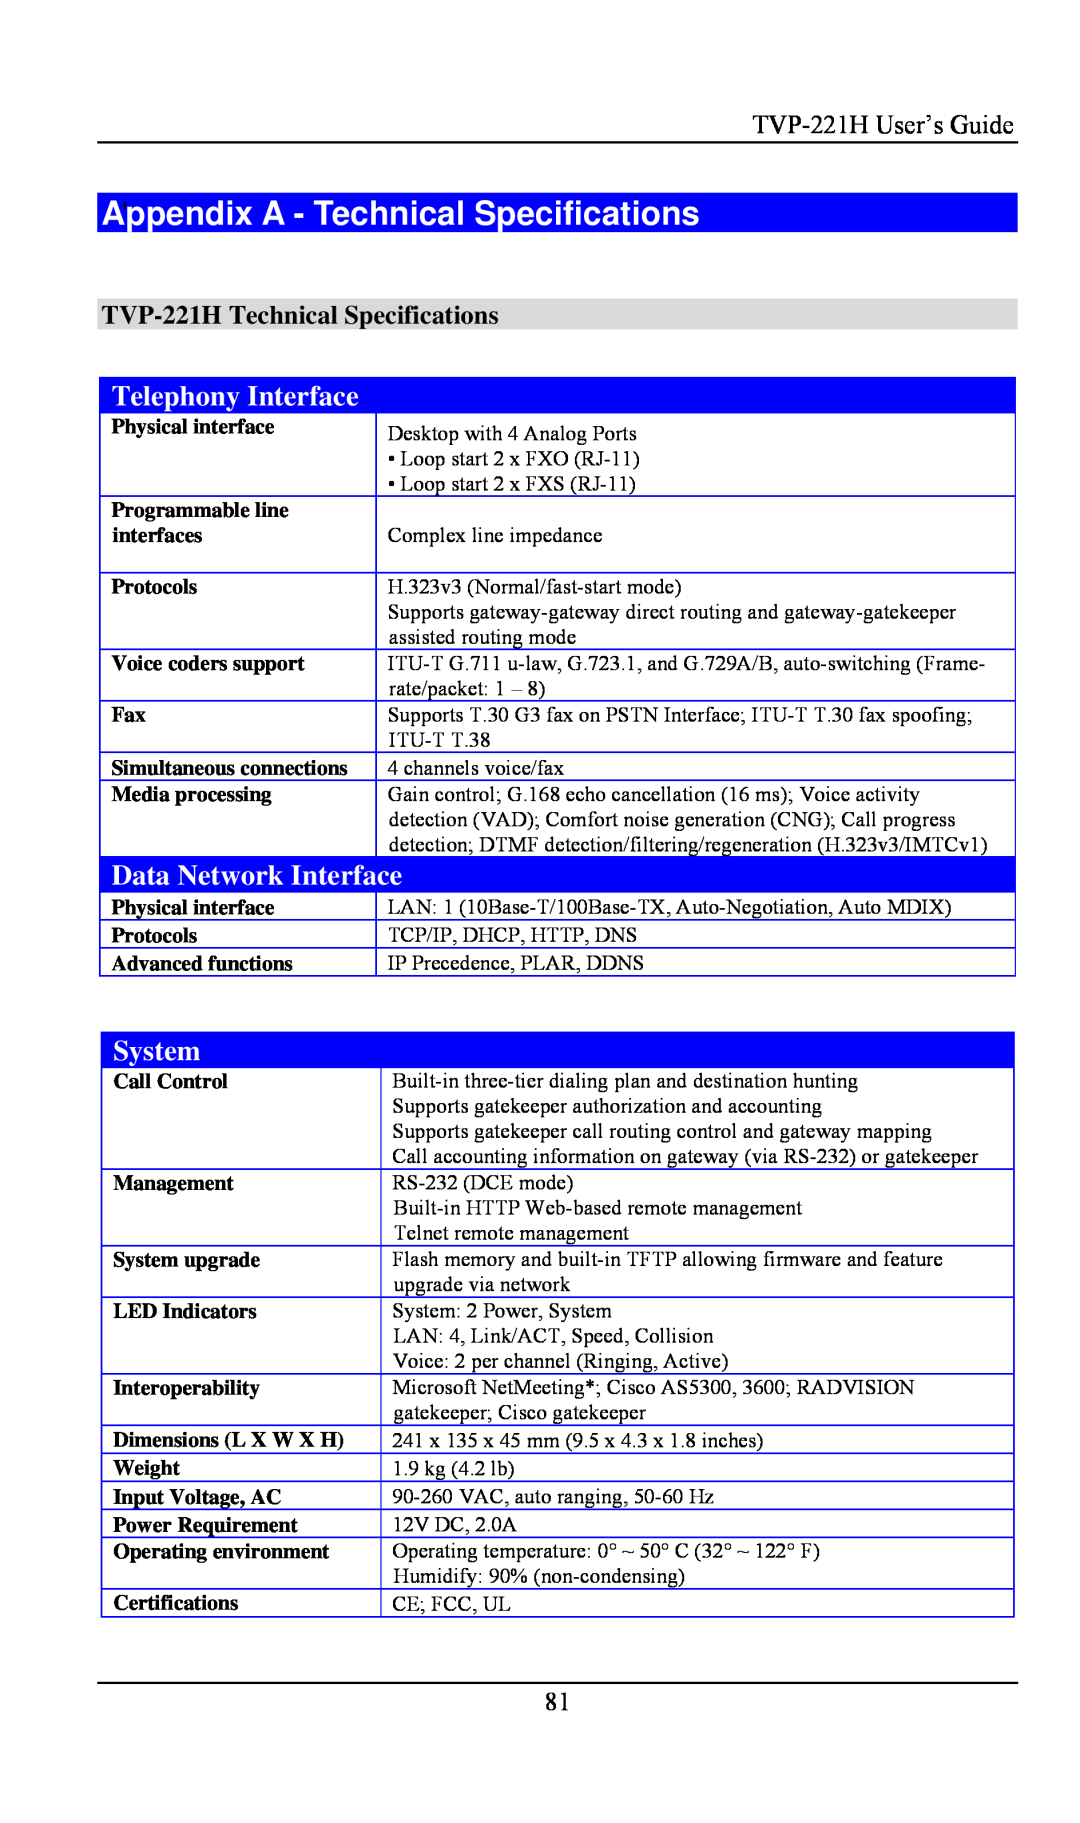 TRENDnet VoIP Gateway manual Appendix A - Technical Specifications, Telephony Interface, System, Data Network Interface 